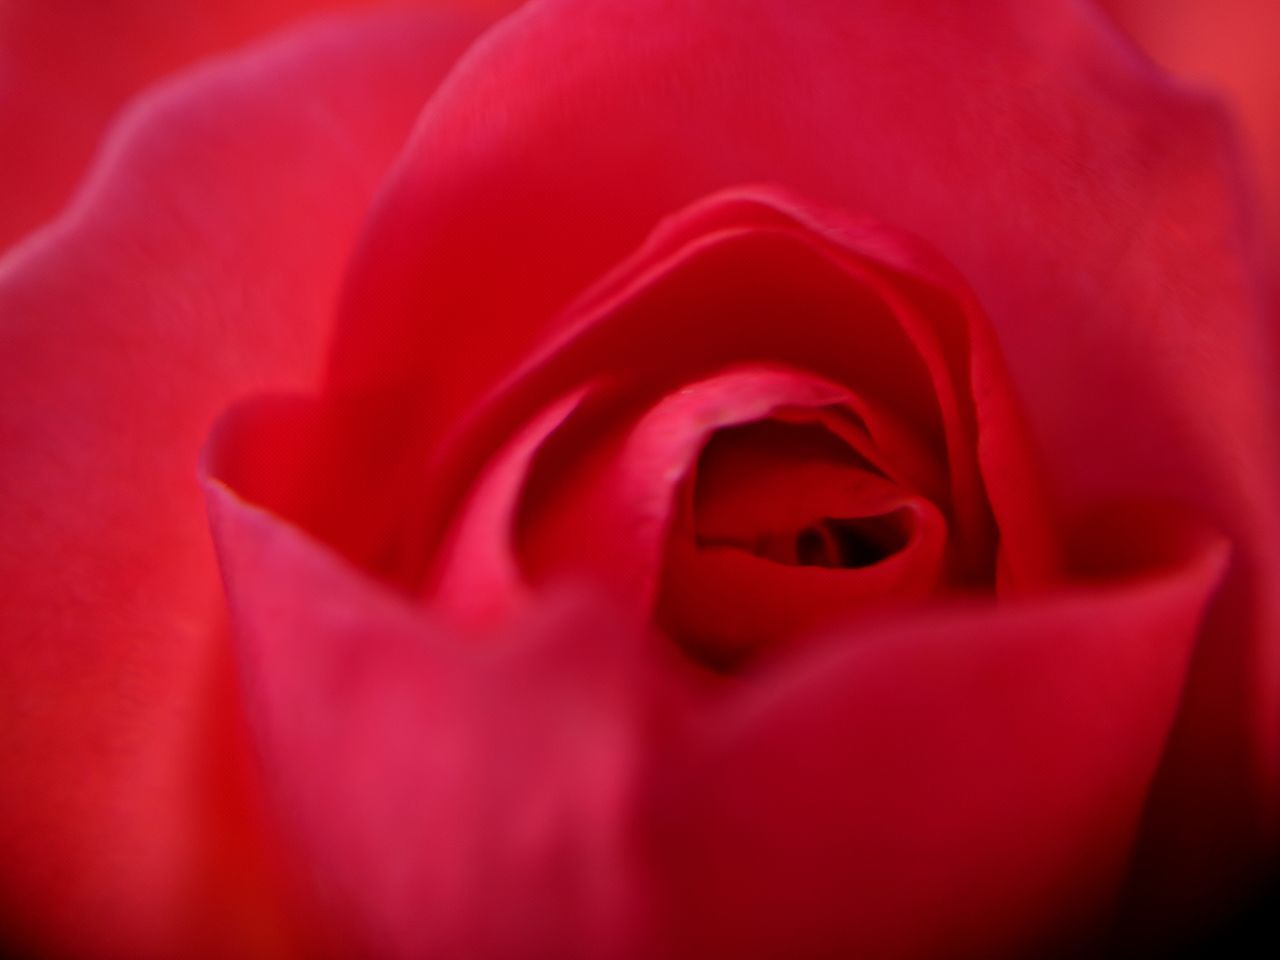 CLOSE UP OF RED ROSE HEAD